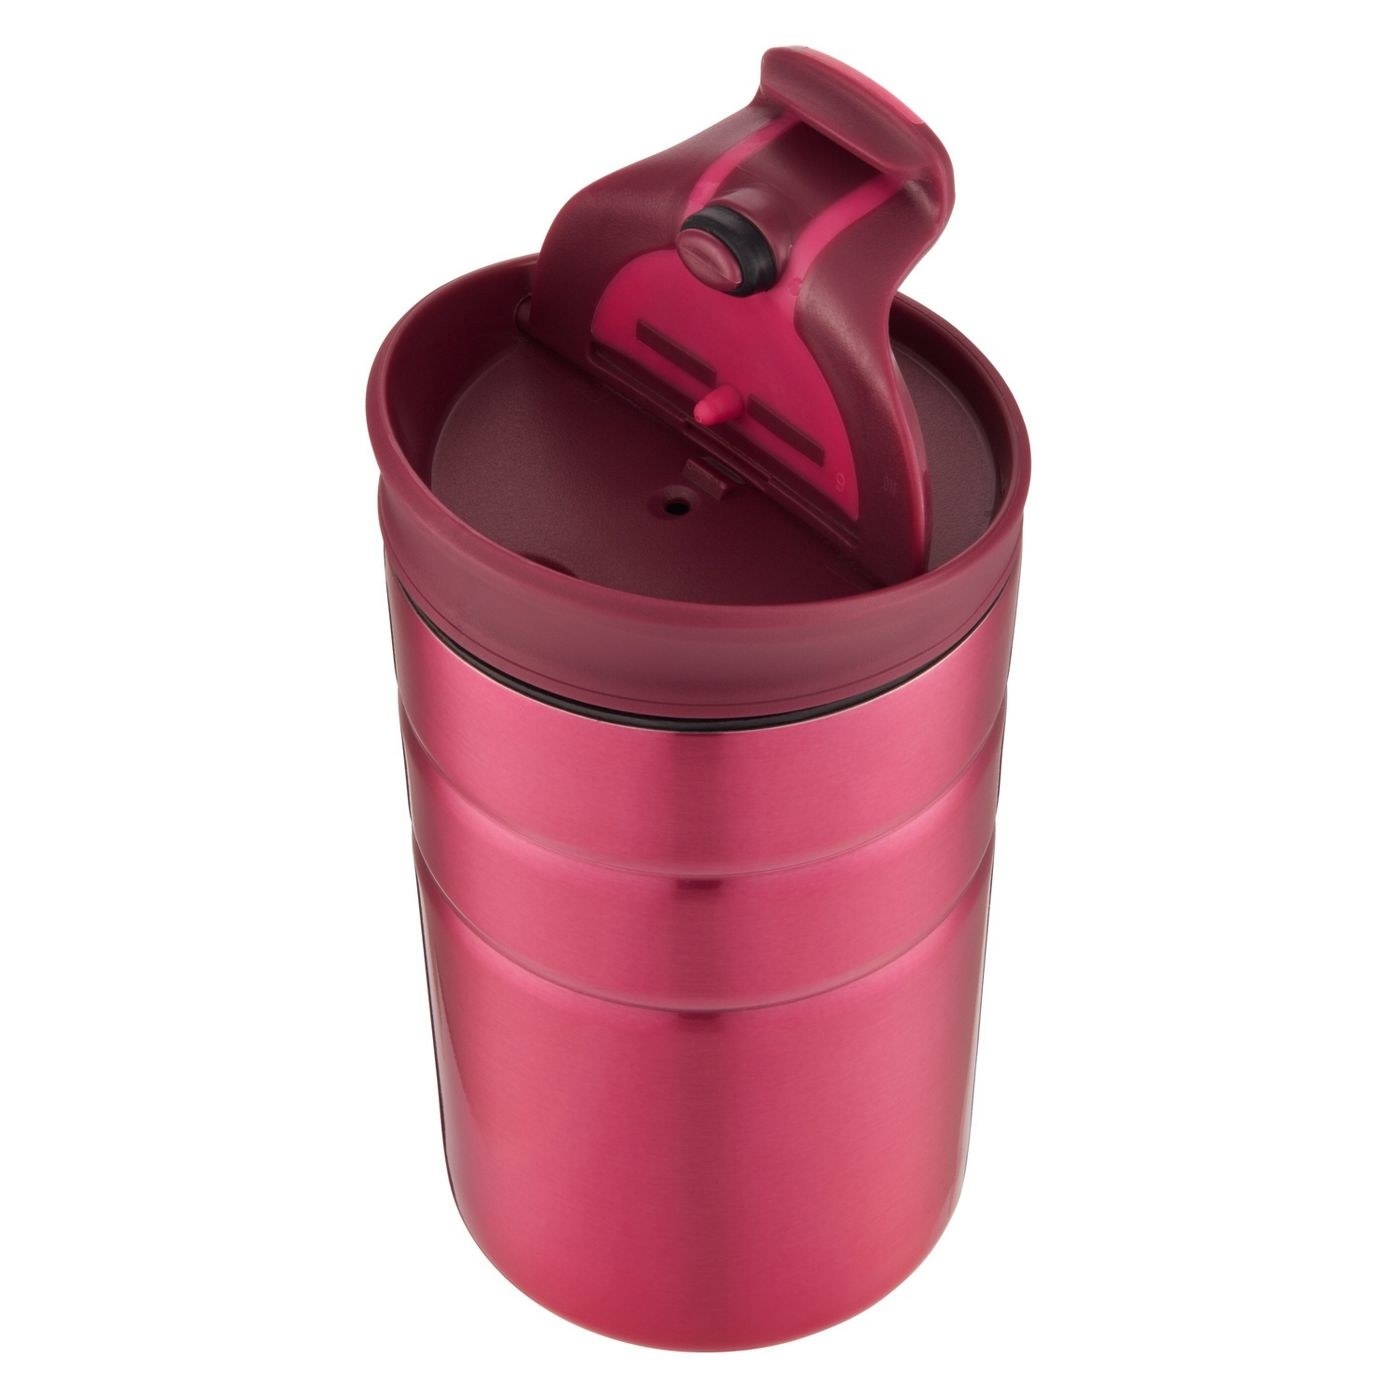 The mug, which has a locking flip top, in red